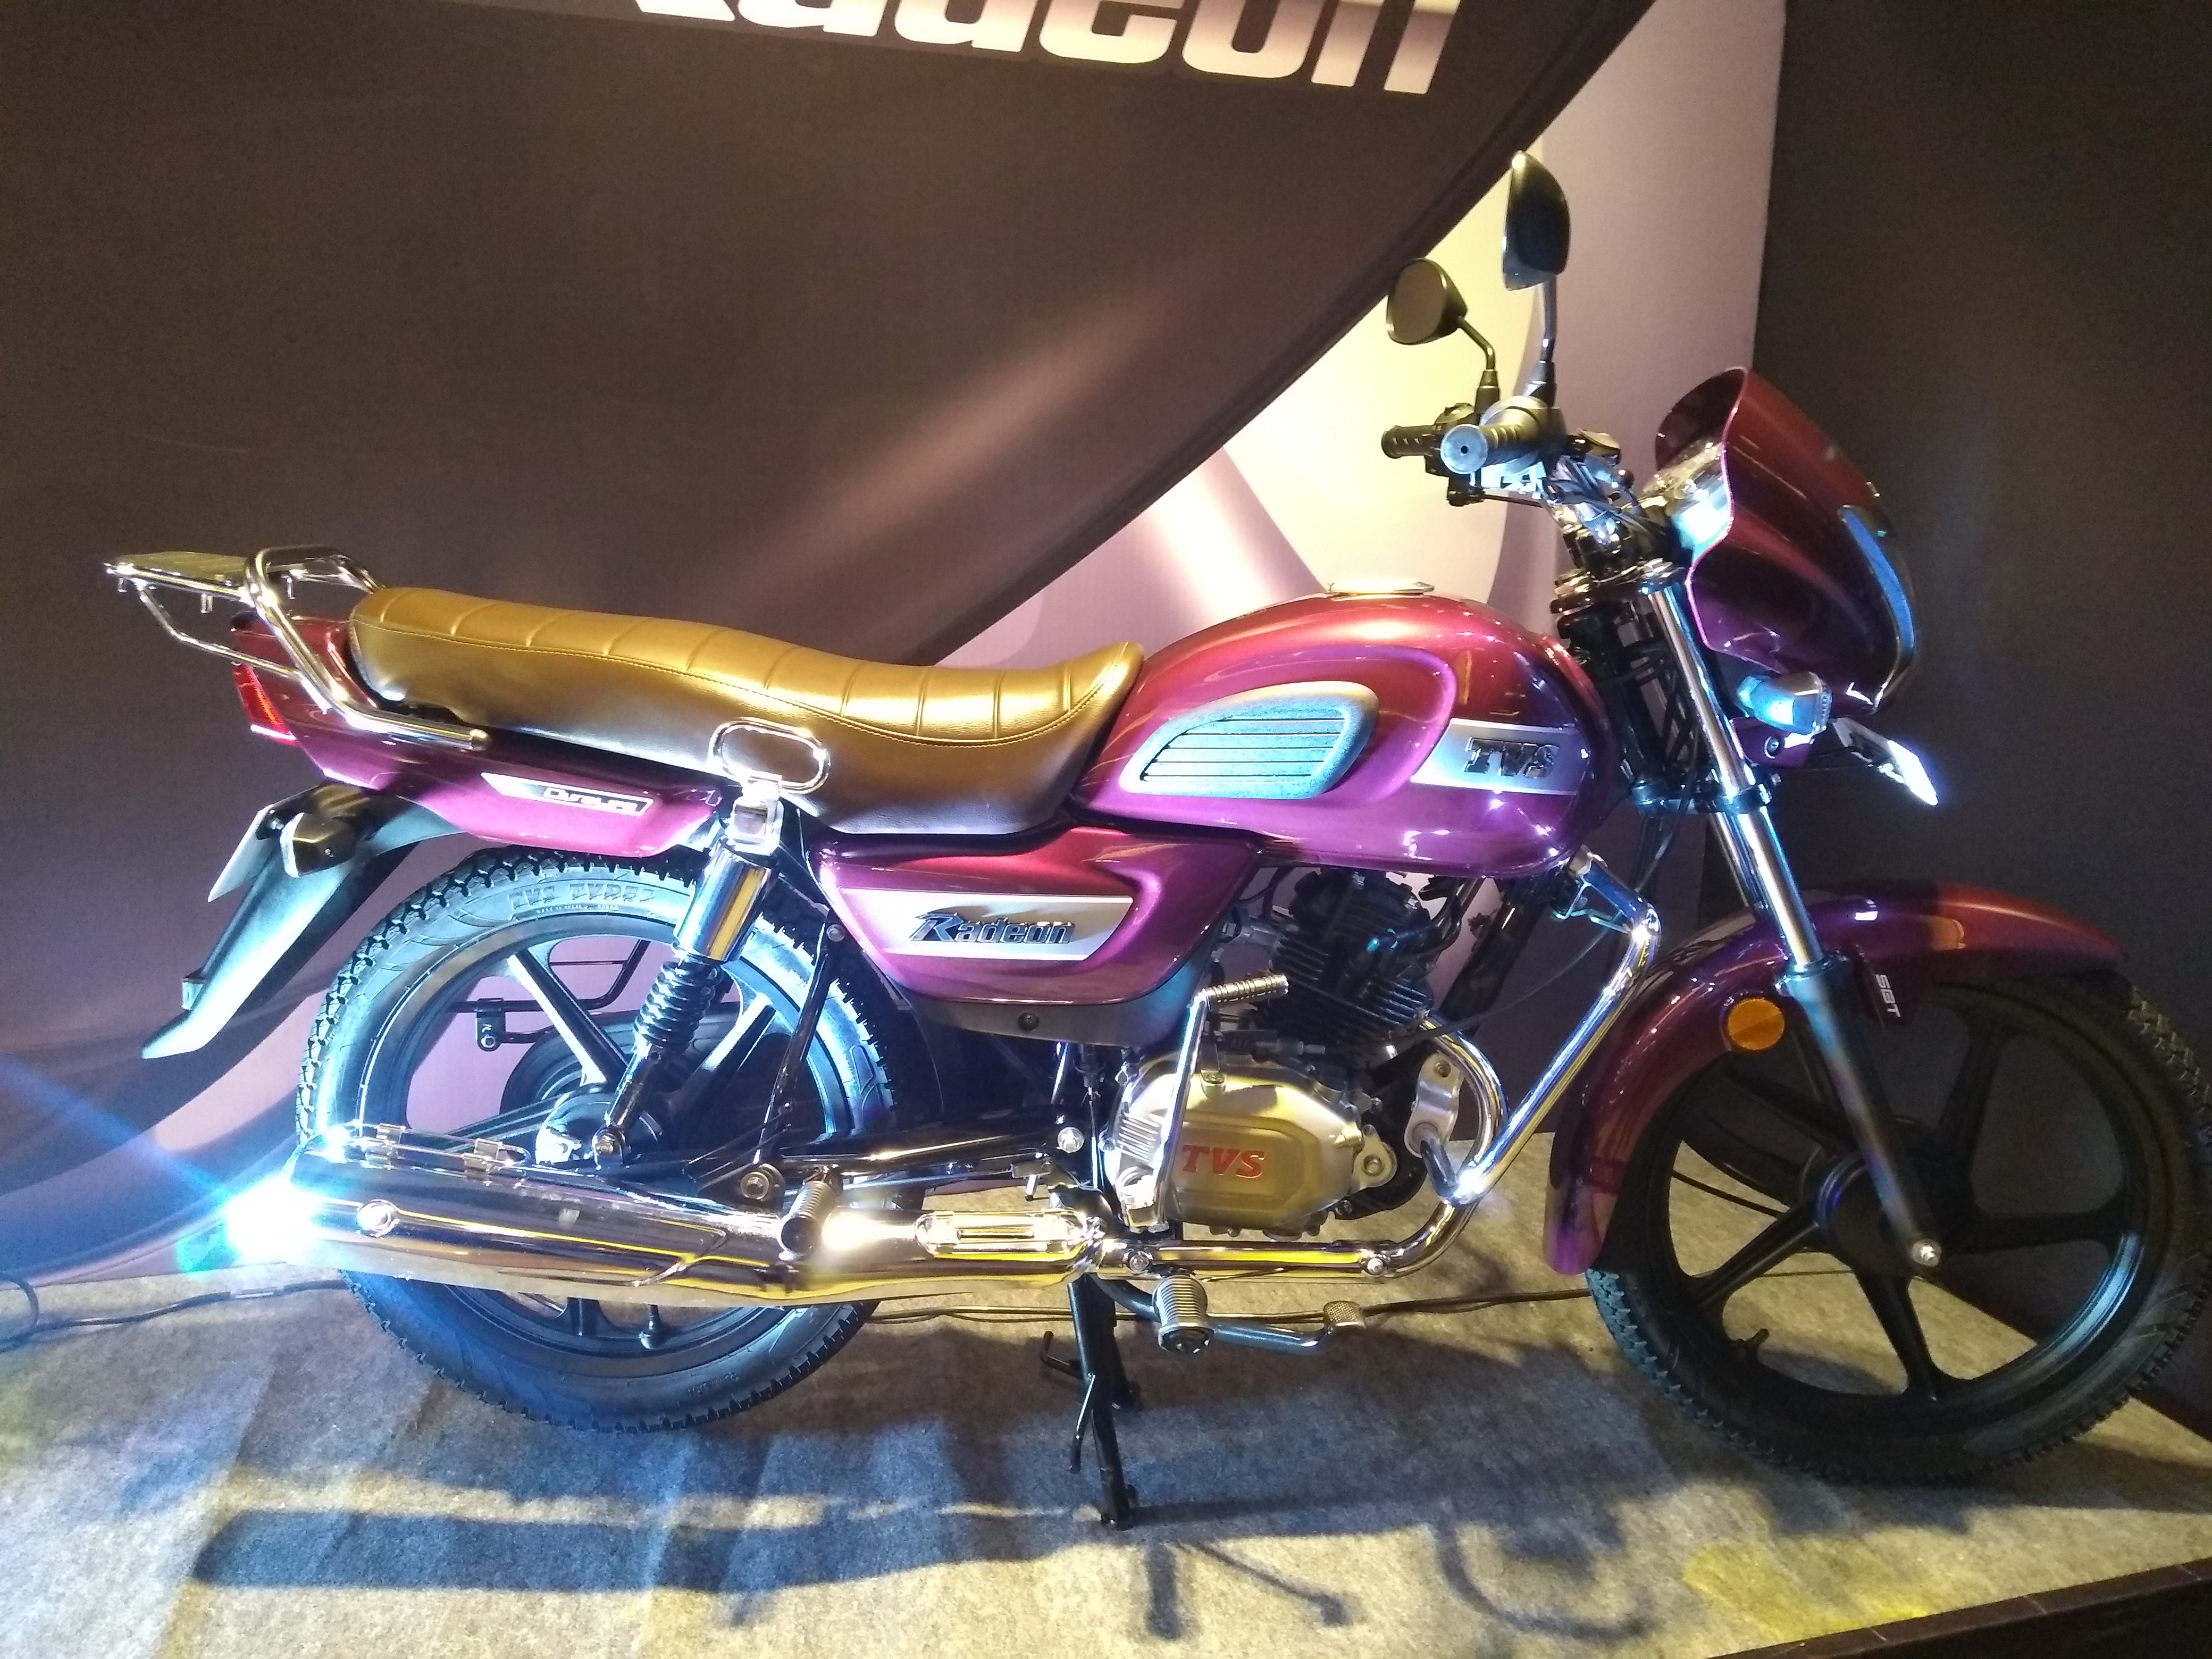 tvs-radeon-commuter-launched-in-india-priced-at-inr-48-400